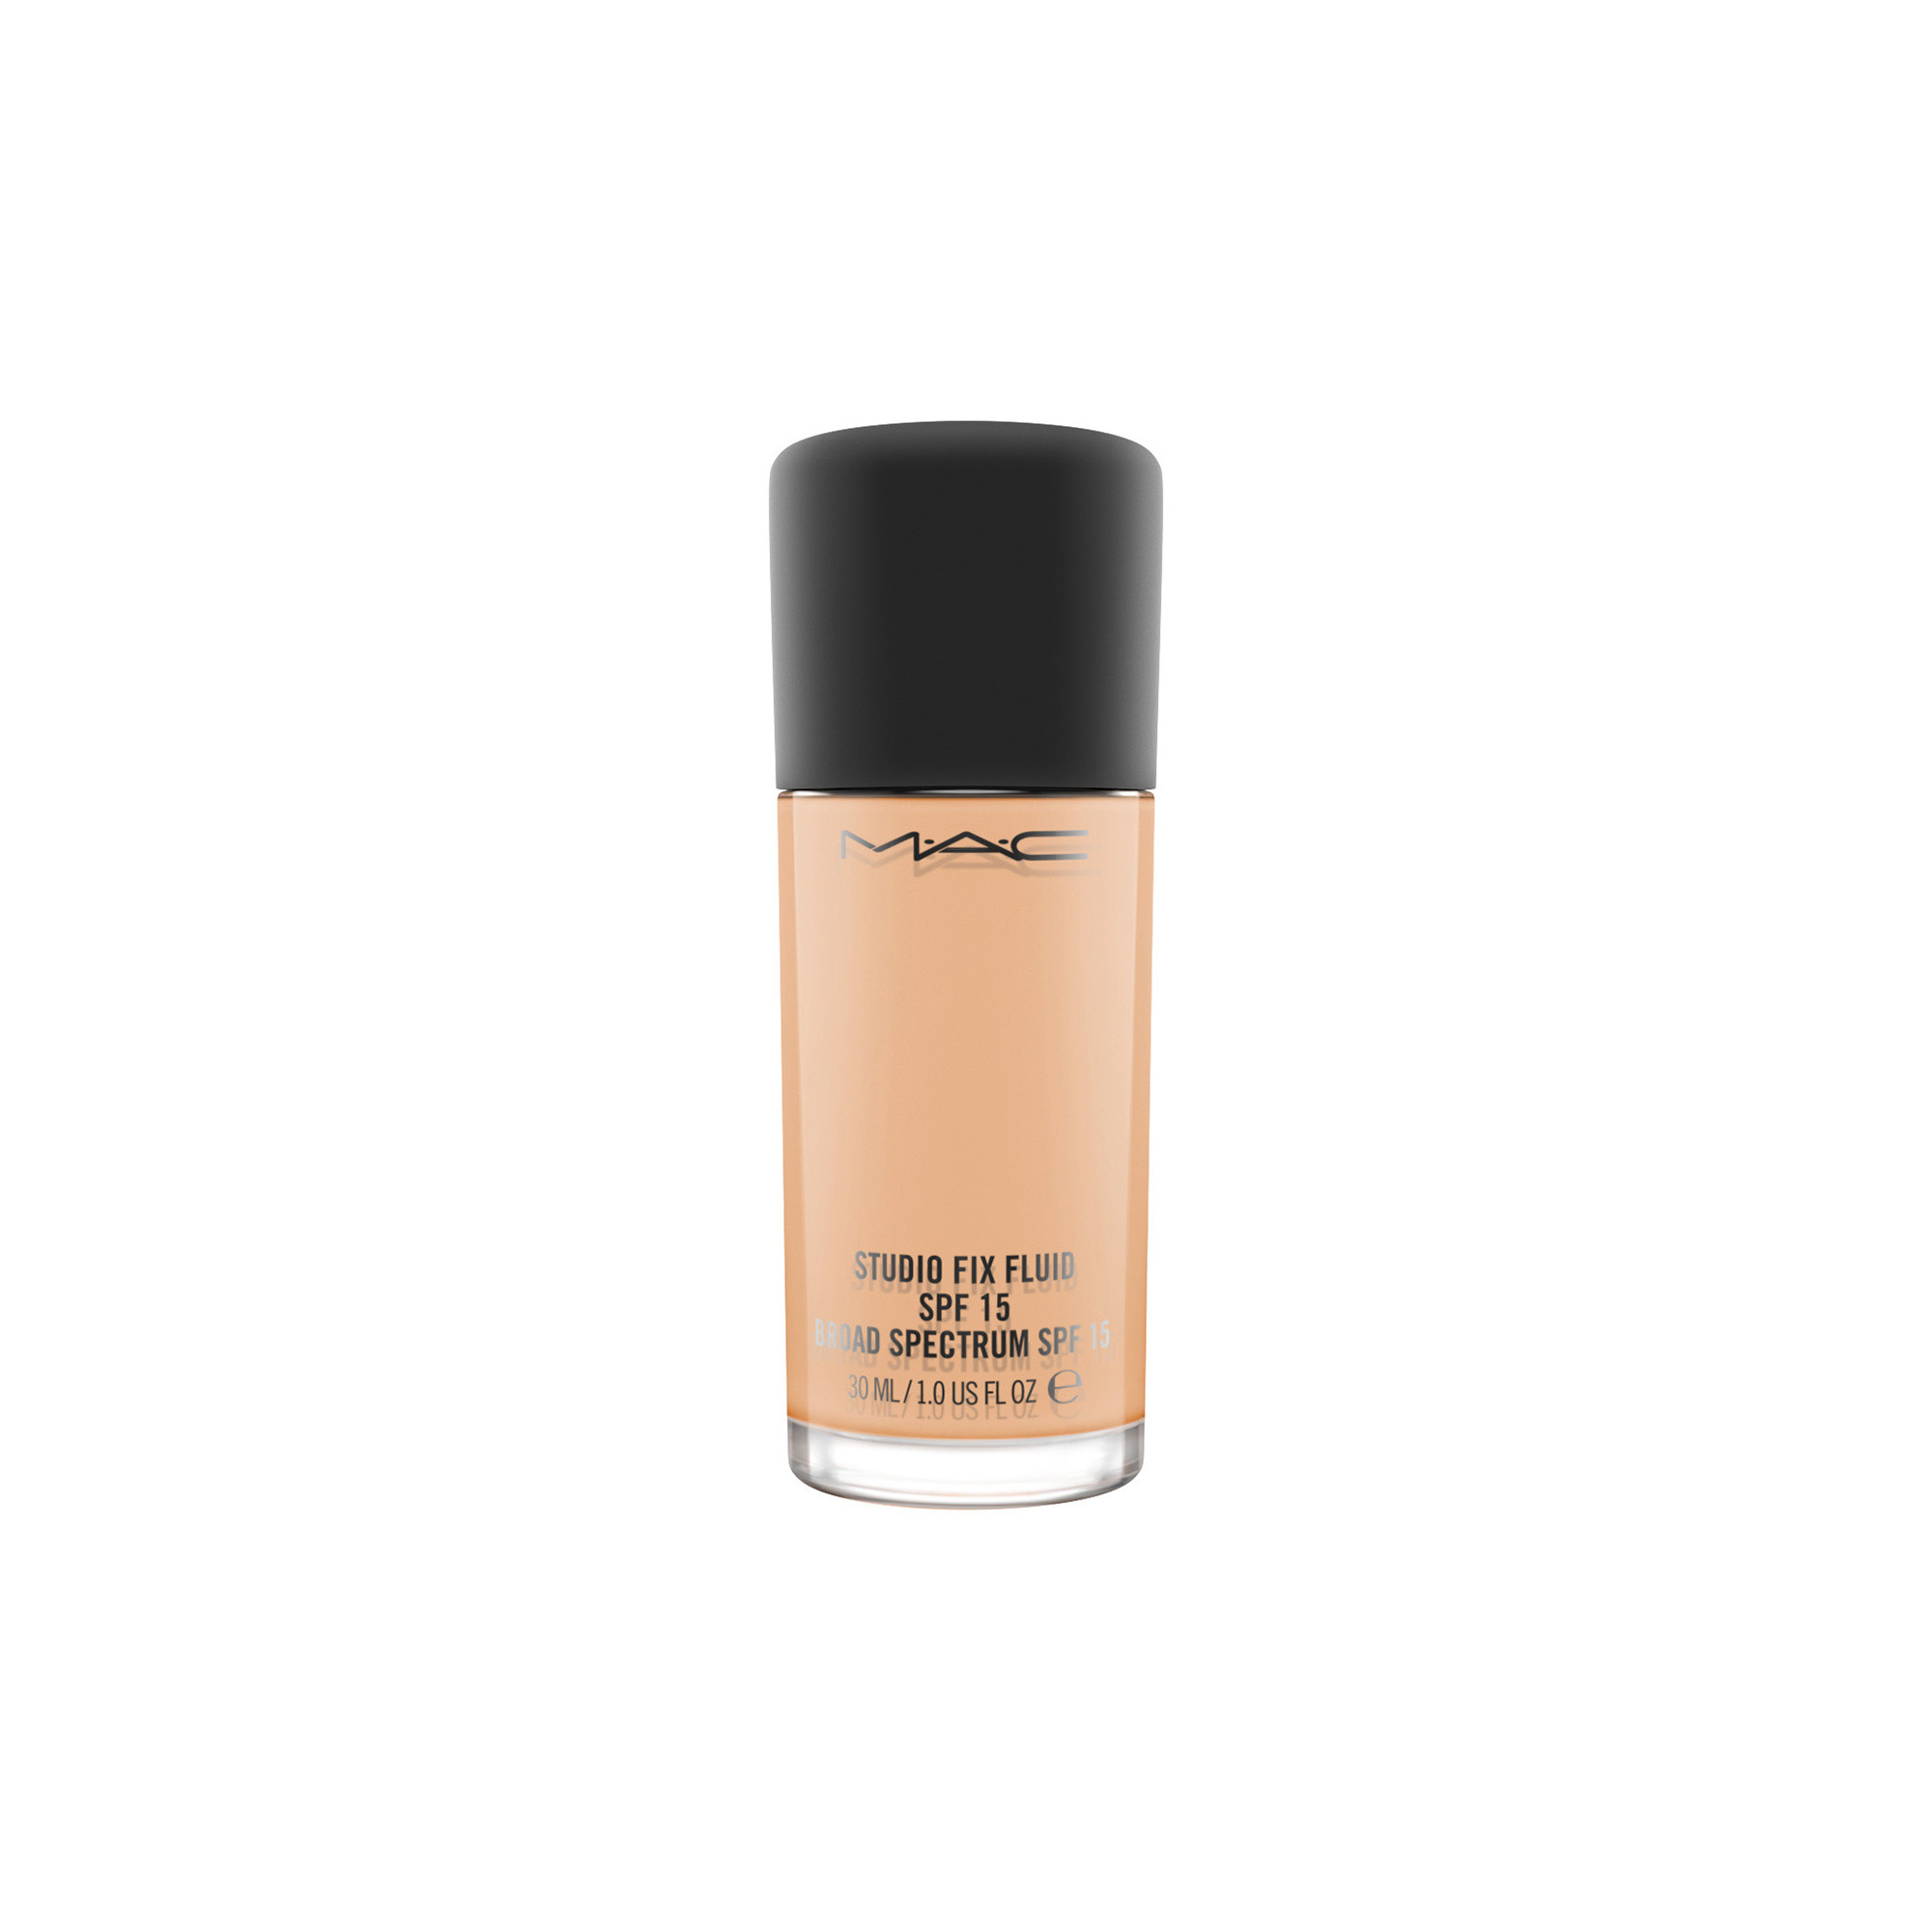 Studio Fix Fluid Foundation Spf15 - NW22, NW22, large image number 0